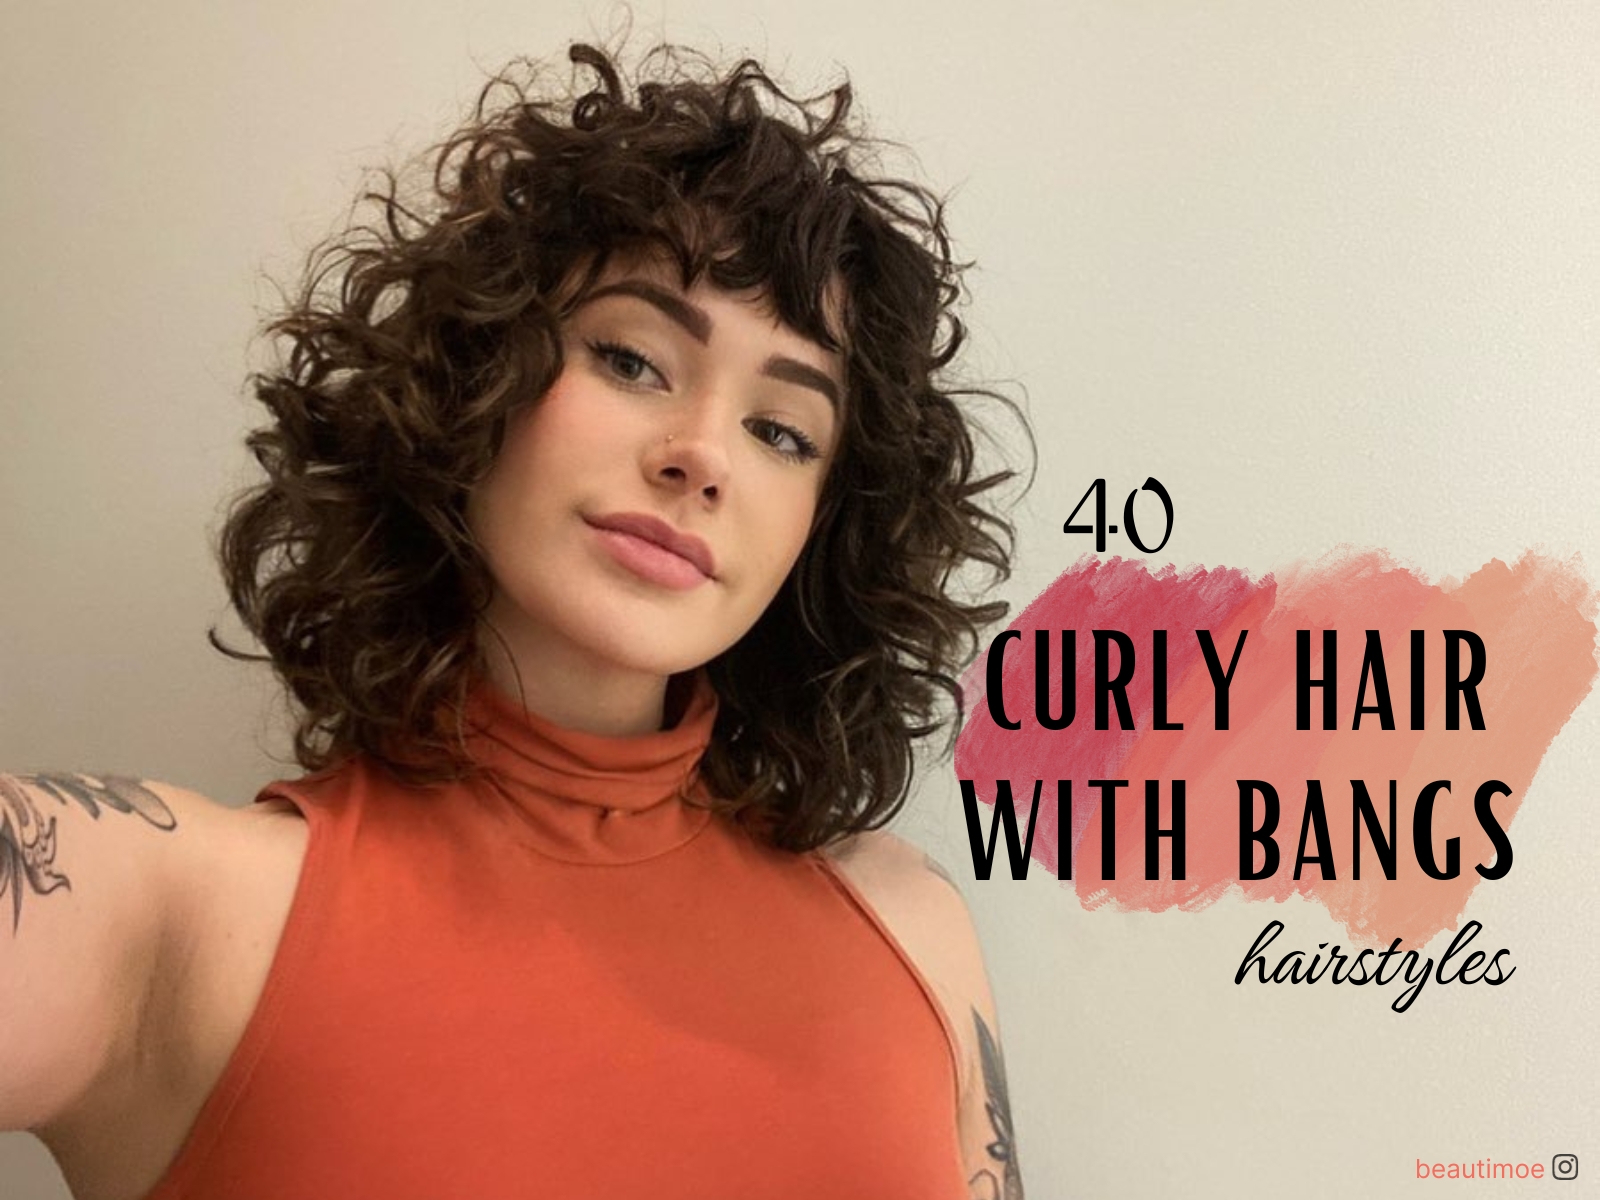 40 Stylish And Effortless Curly Hair Hairstles With Bangs Hairstyles